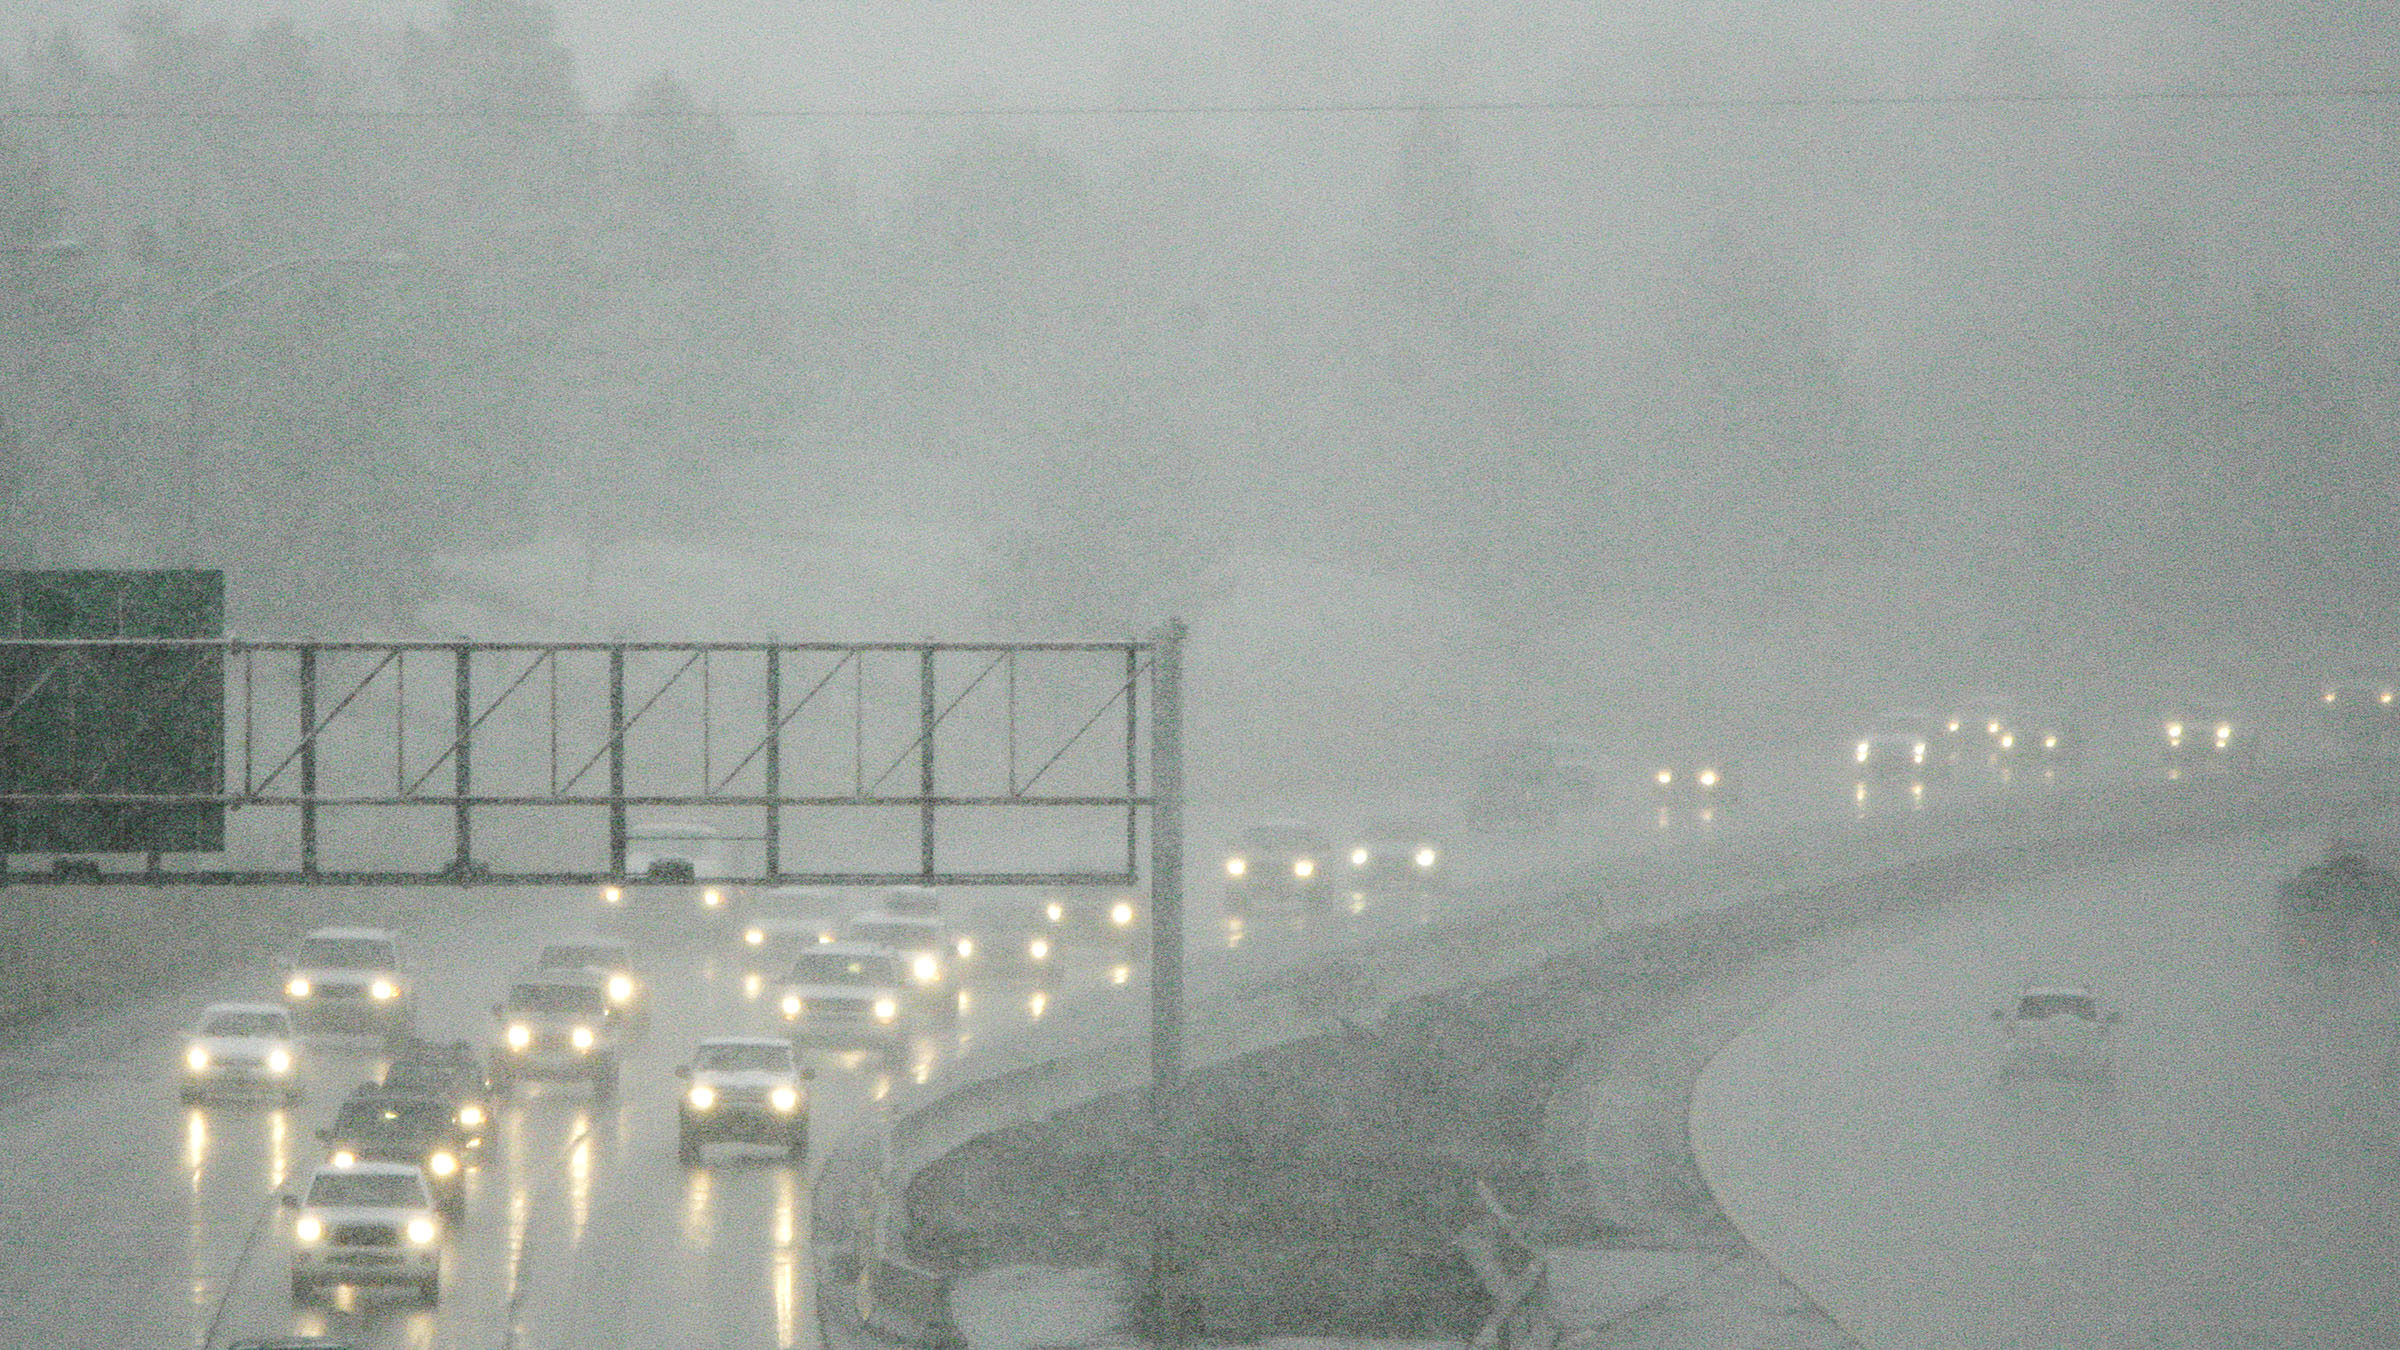 Commuters drive through the snowy conditions on Interstate 80 in Salt Lake City, Utah, Wednesday, M...